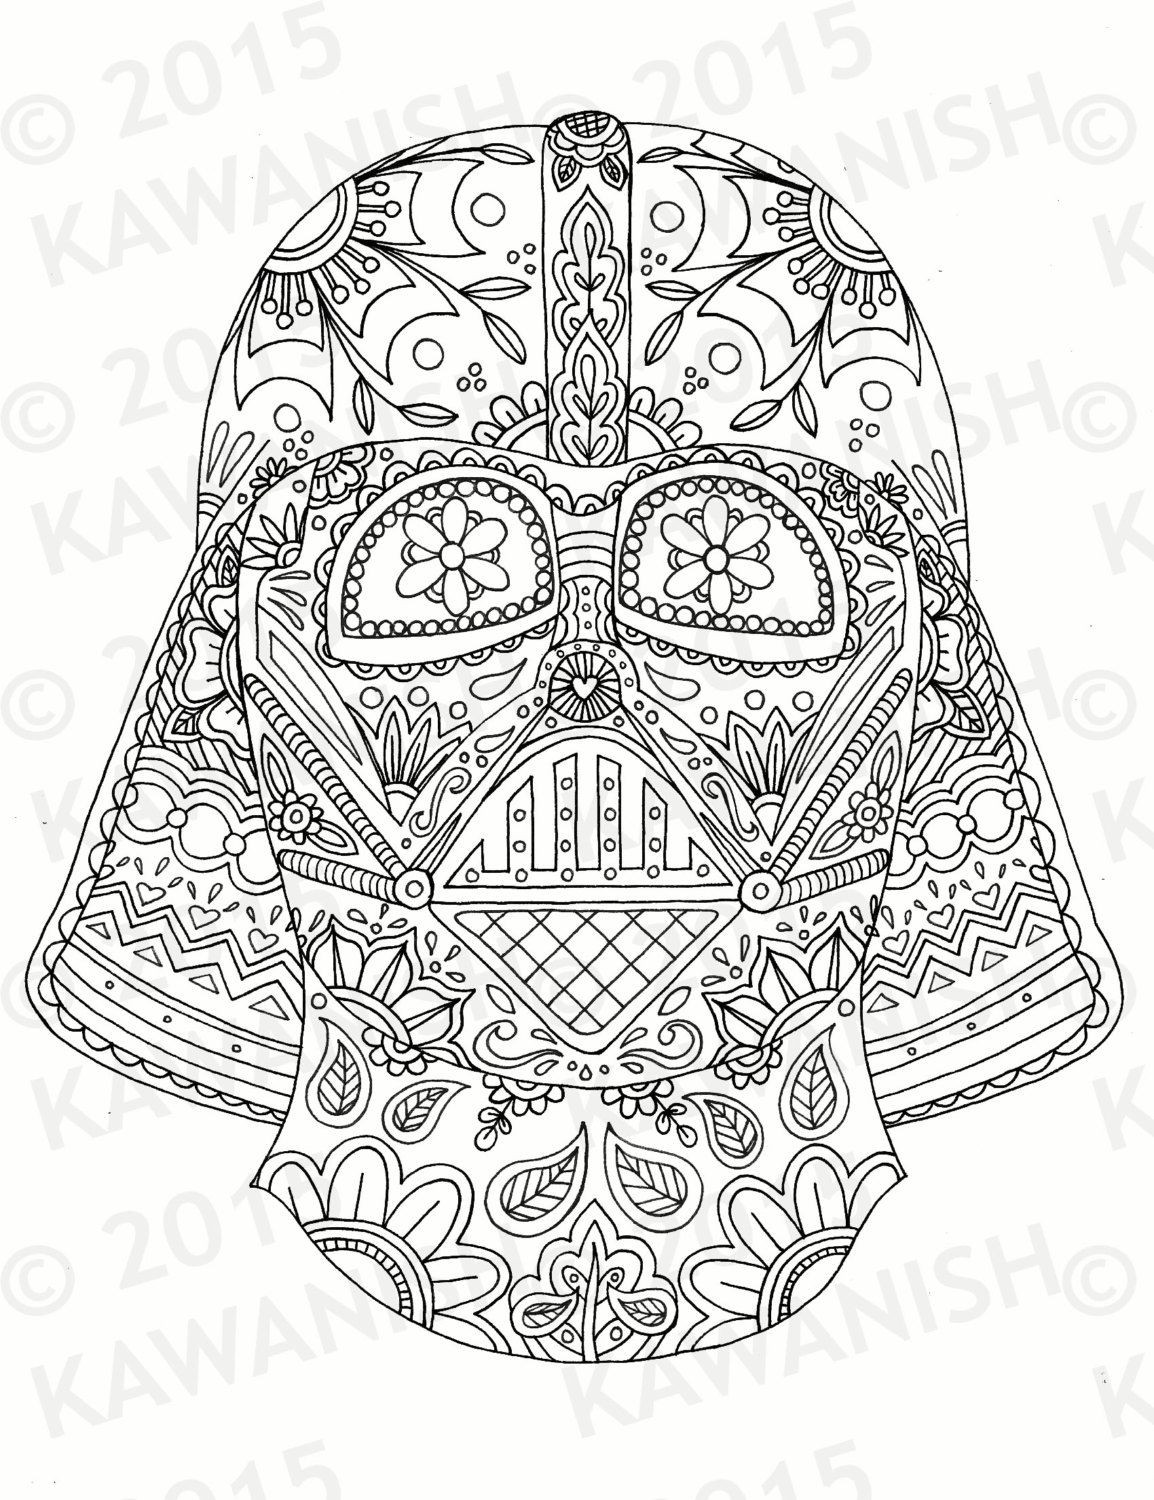 Adult Star Wars Coloring Book
 Darth Vader mask adult coloring page t wall art star